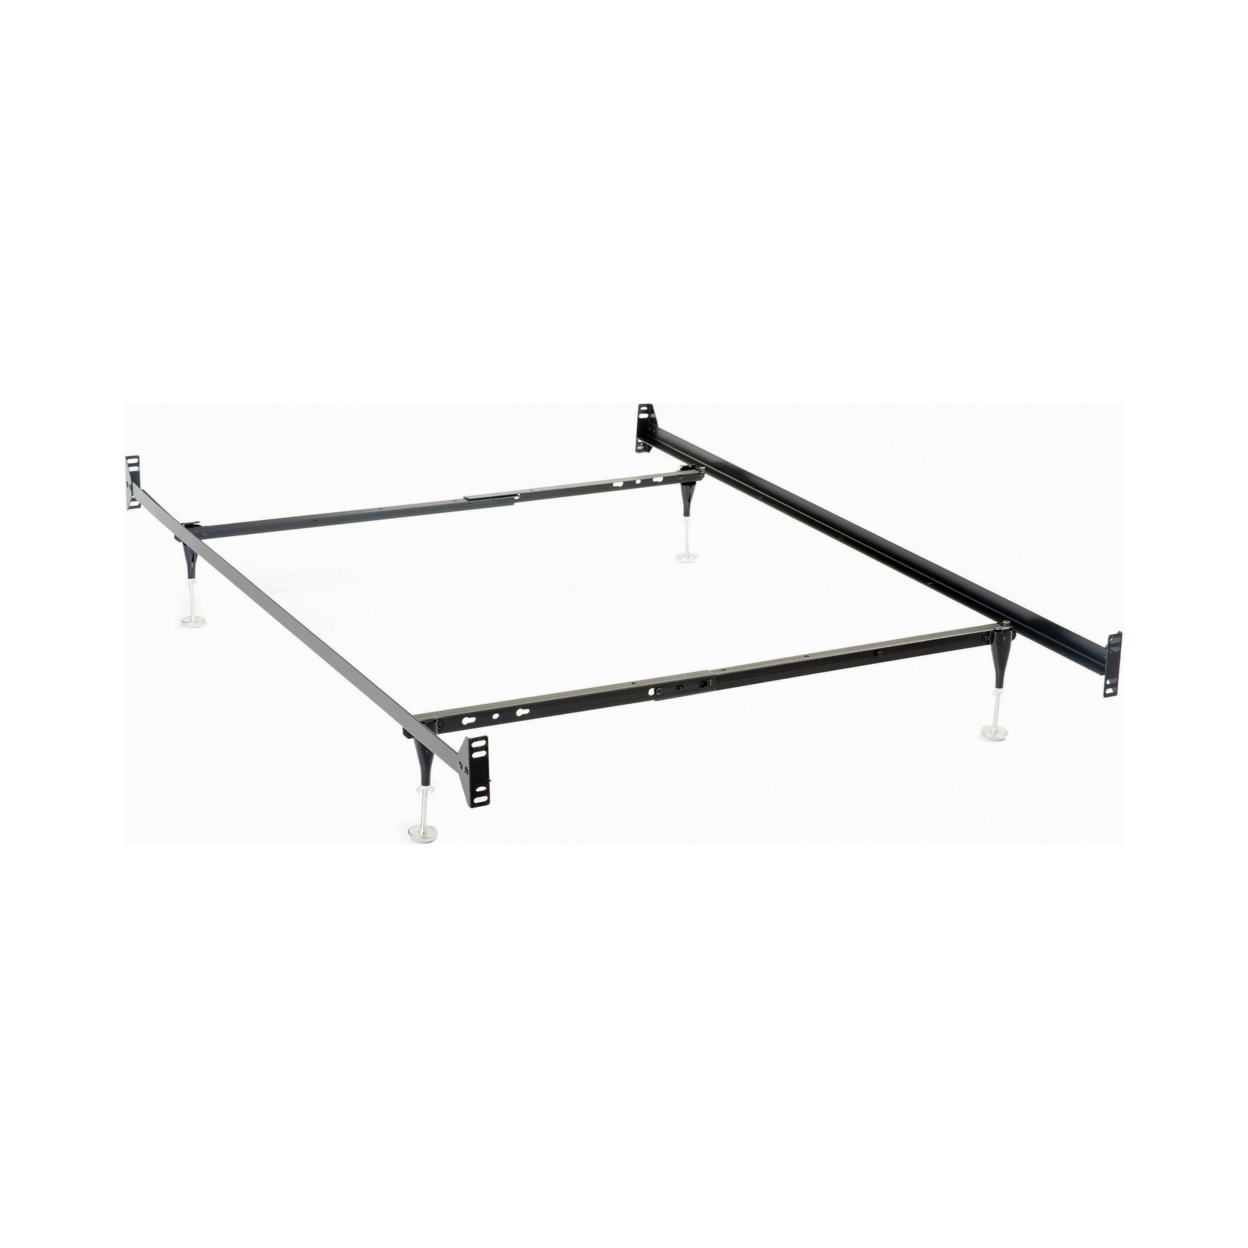 Nit Multisize Bed Frame, Twin Or Full, 4 Legs With Glides, Black Metal- Saltoro Sherpi